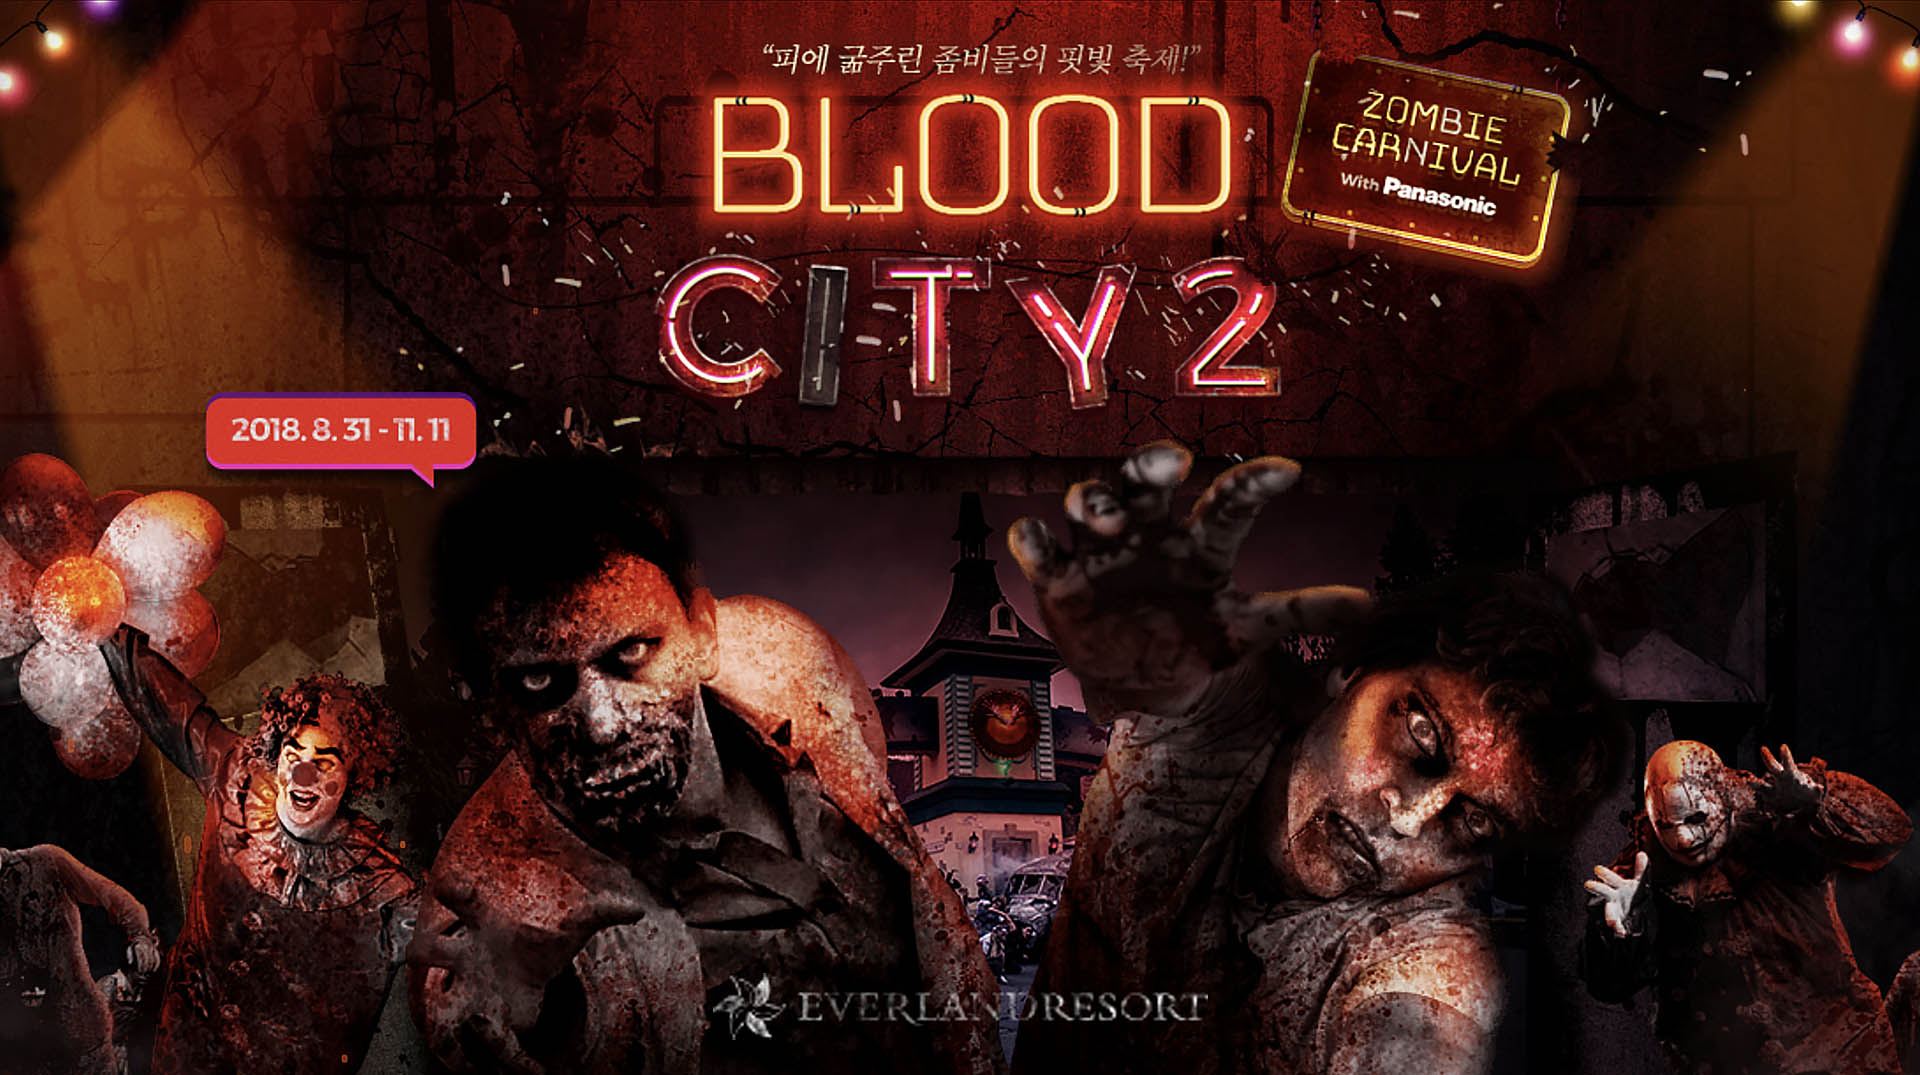 Everland "BLOOD CITY 2 : Zombie Carnival" will open